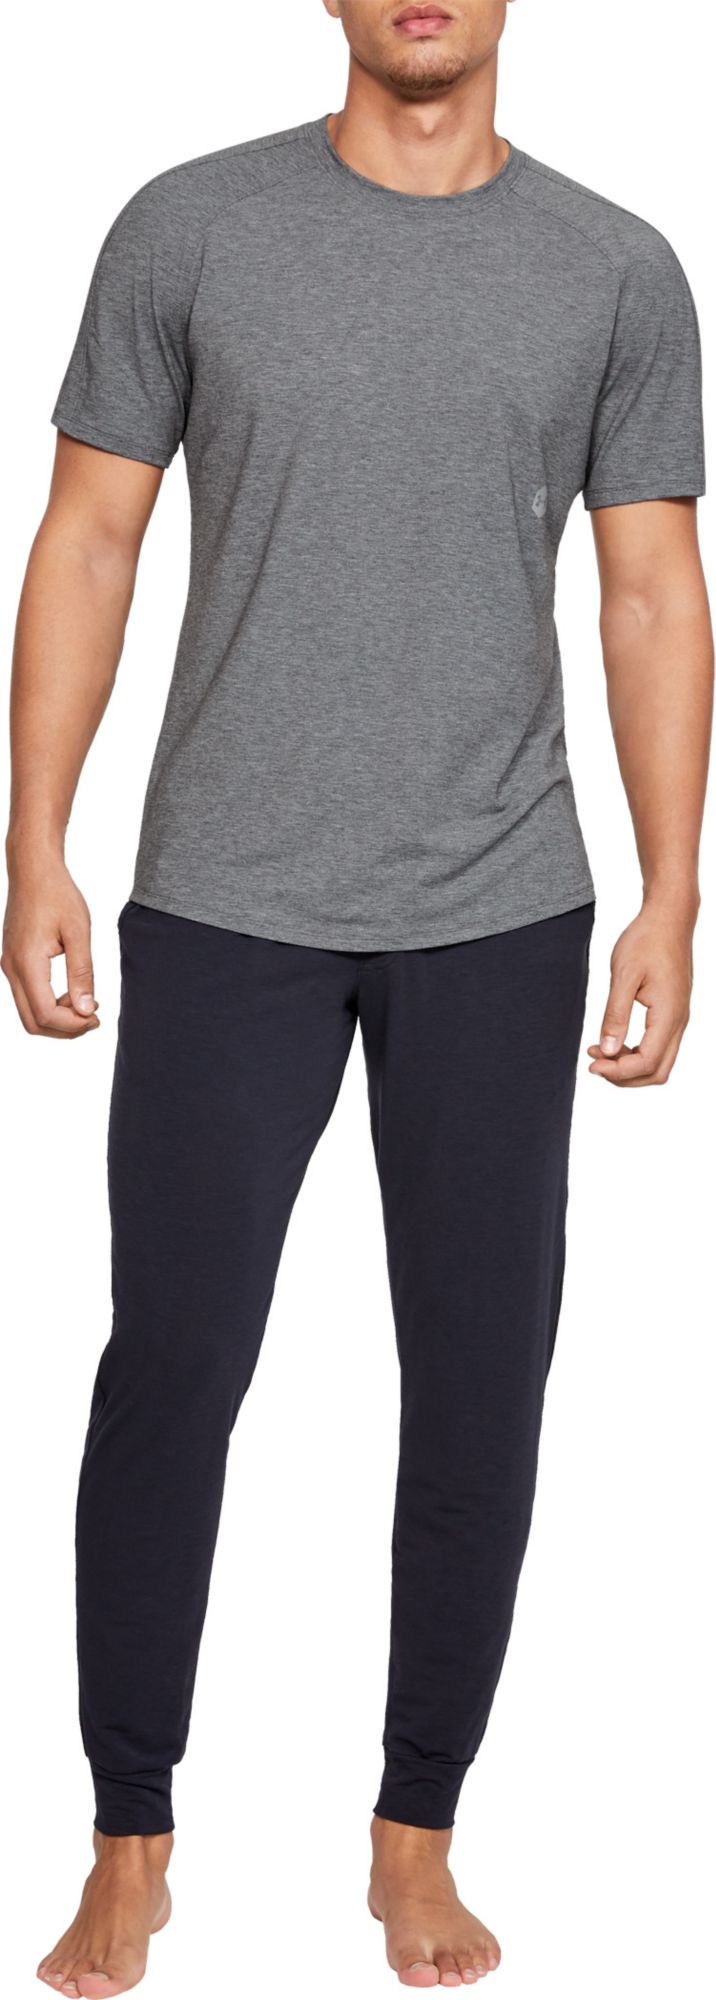 under armour recovery t shirt